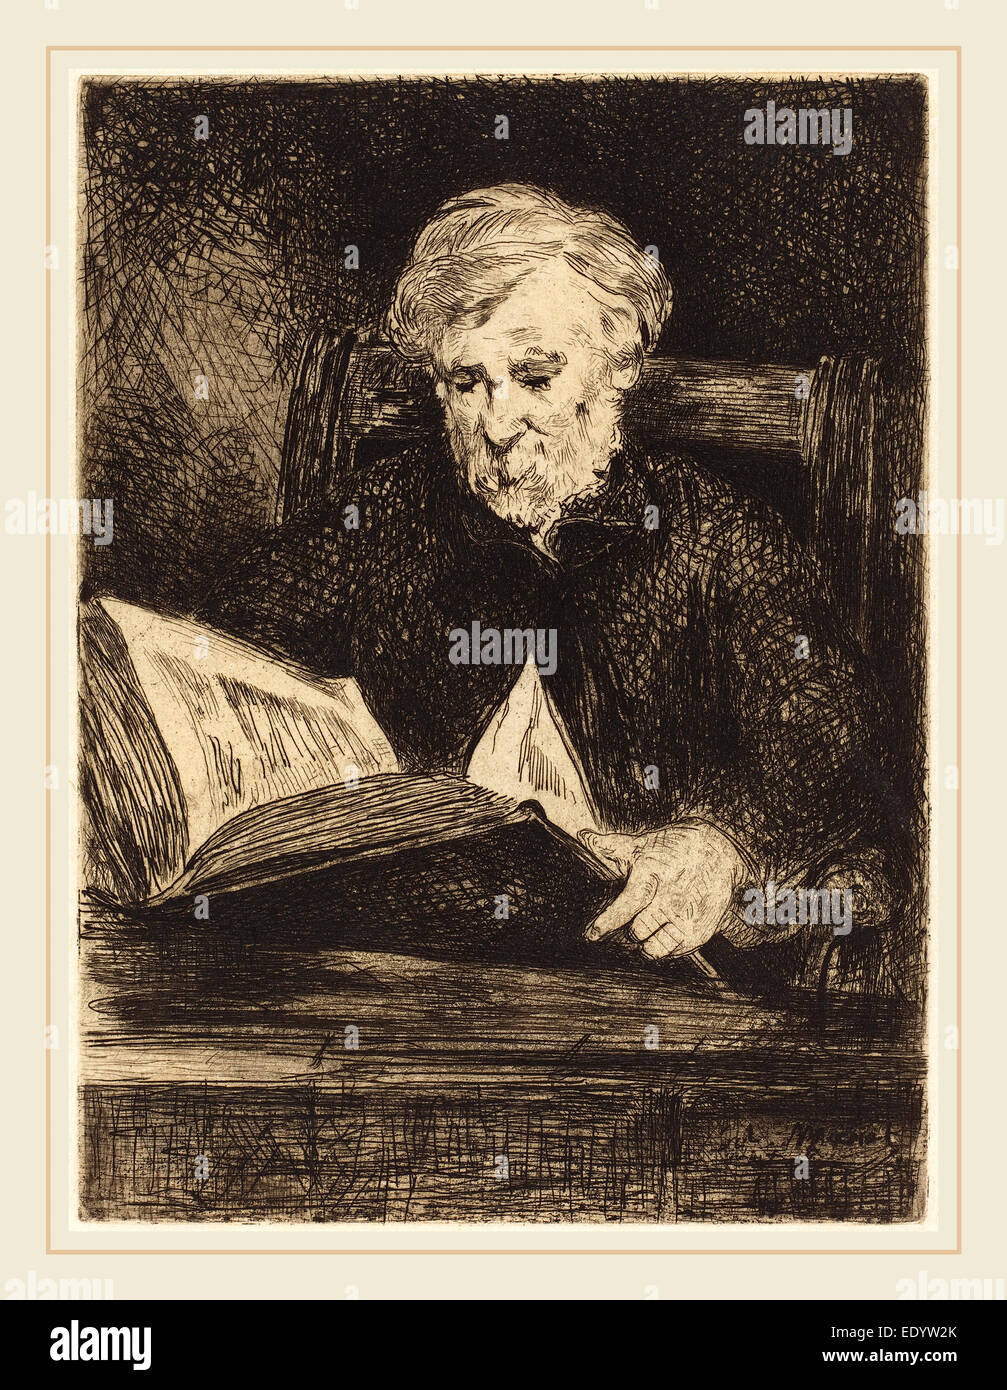 Edouard Manet, French (1832-1883), The Reader (Le liseur), 1861, etching Stock Photo